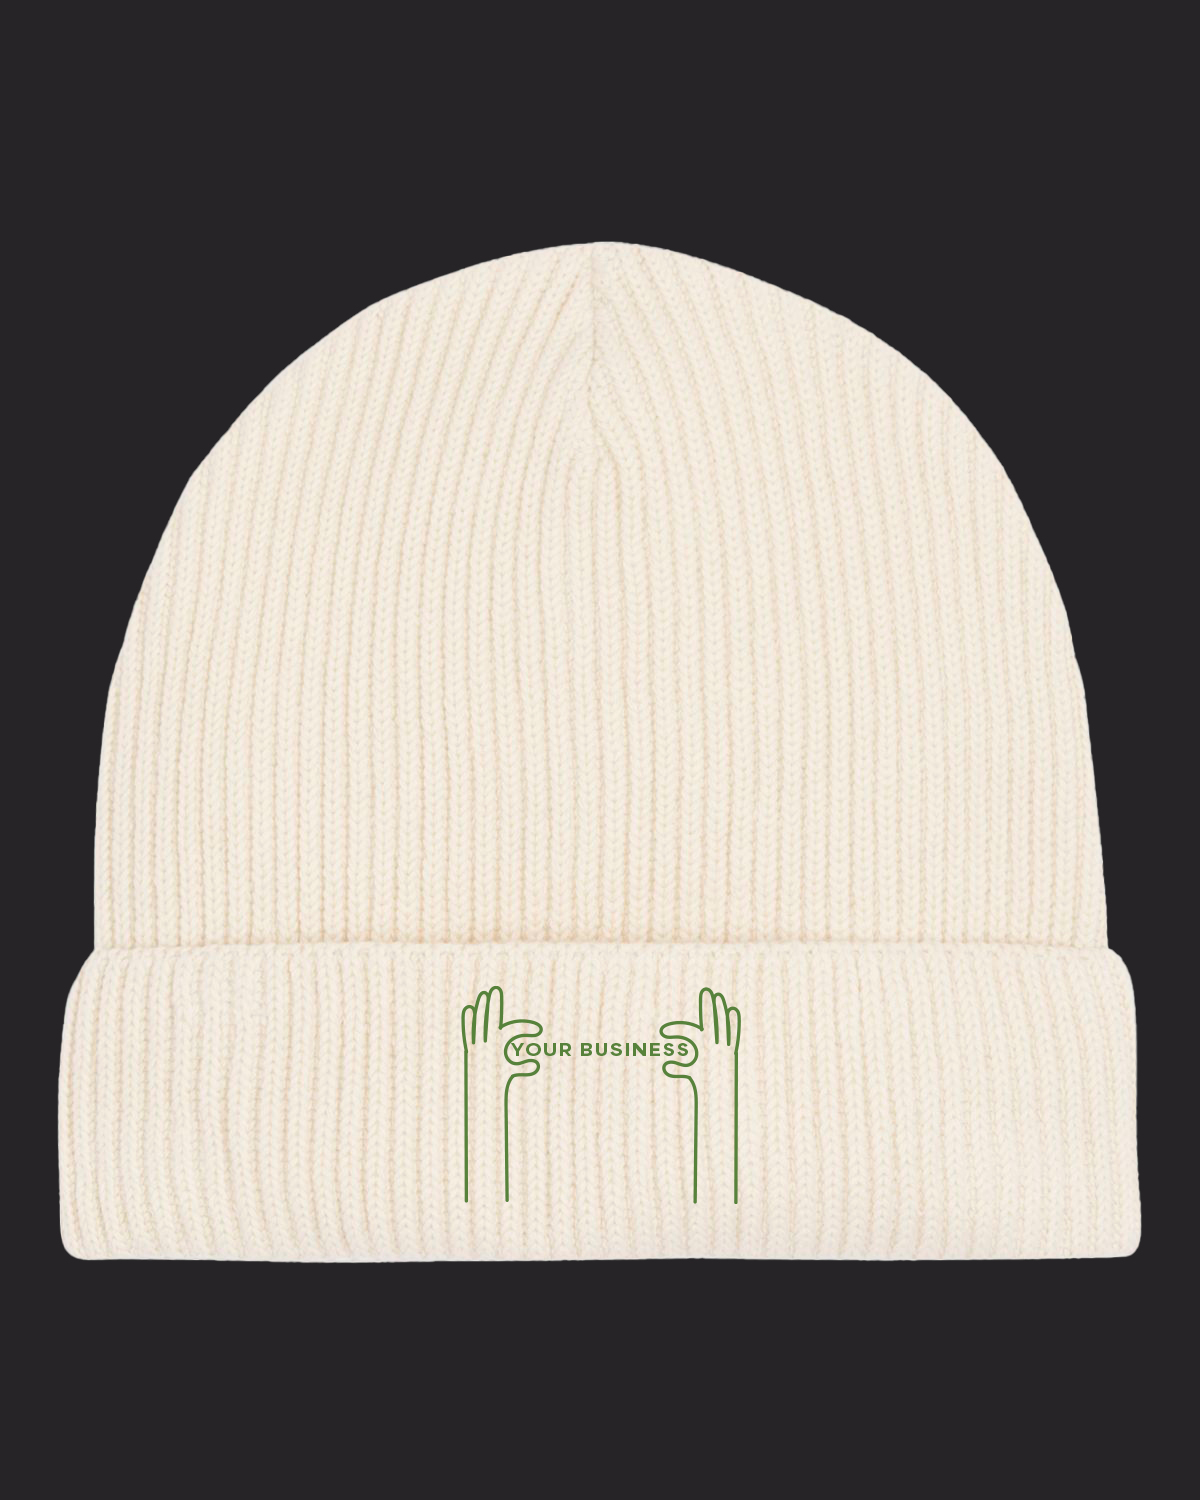 Customize your own sustainable beanie hat made of 95% GOTS-Certified organic cotton.